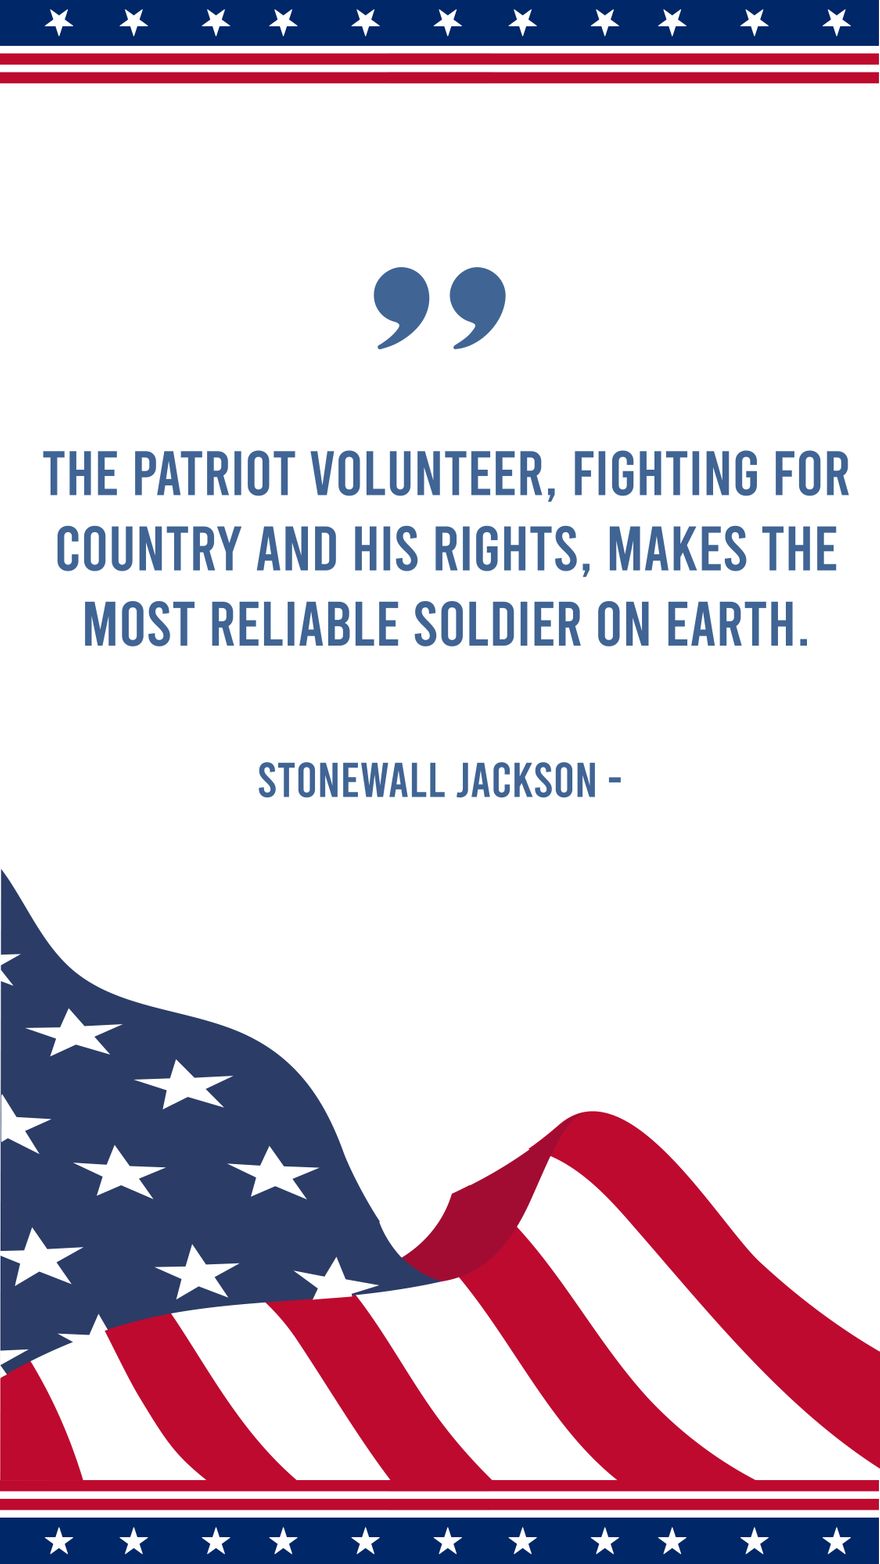 Stonewall Jackson - The patriot volunteer, fighting for country and his rights, makes the most reliable soldier on earth.